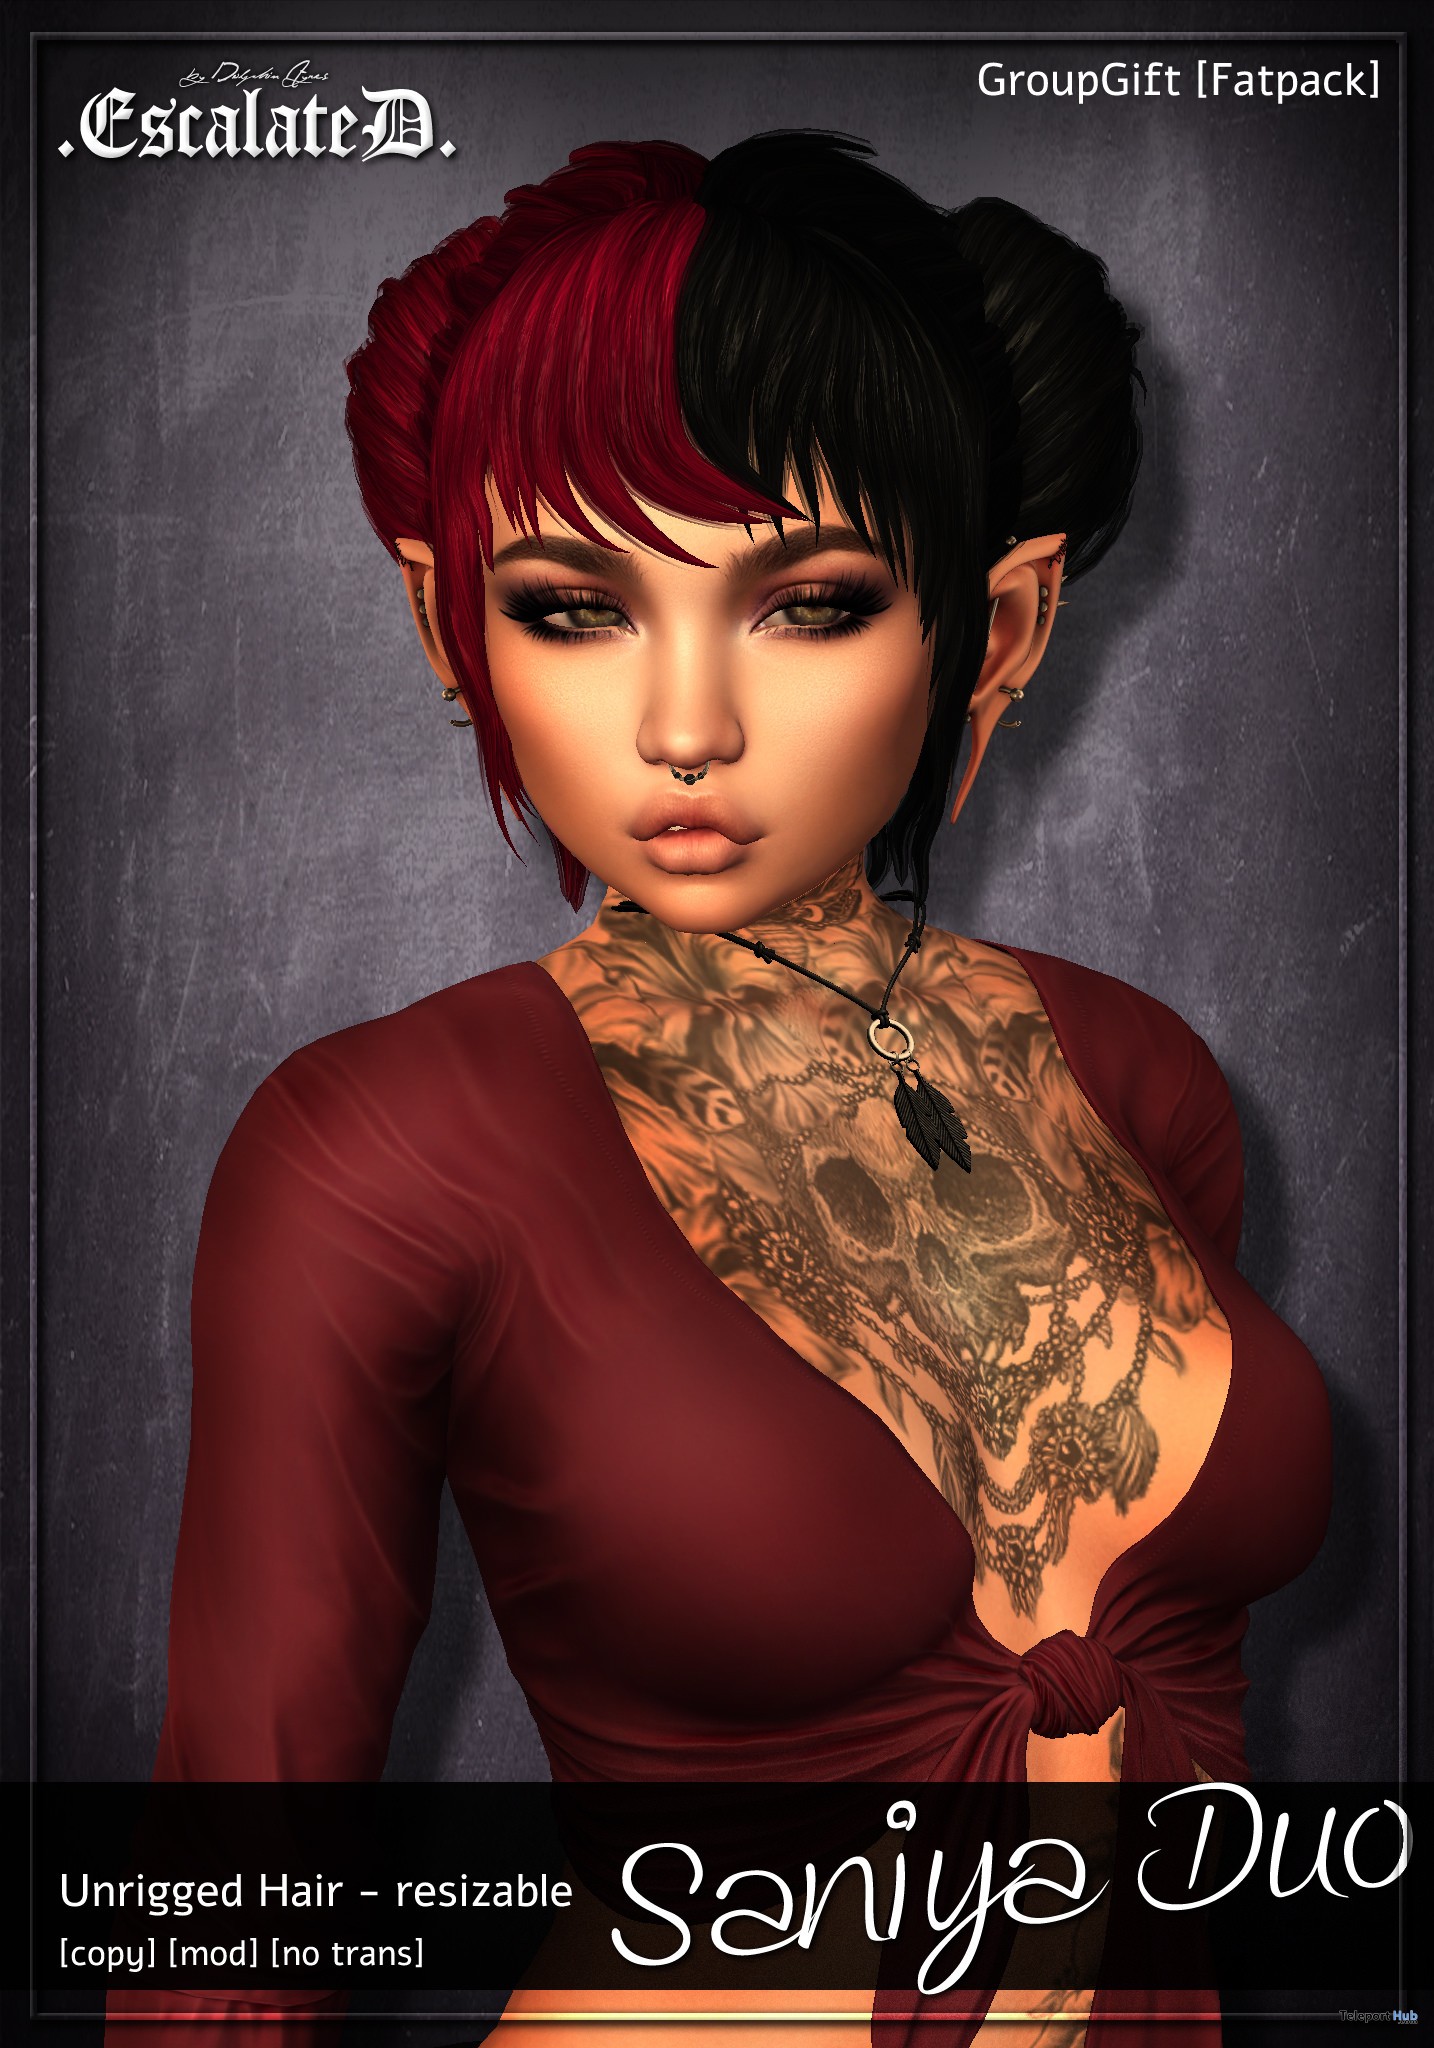 Saniya Duo Fatpack August 2018 Group Gift by EscalateD - Teleport Hub - teleporthub.com